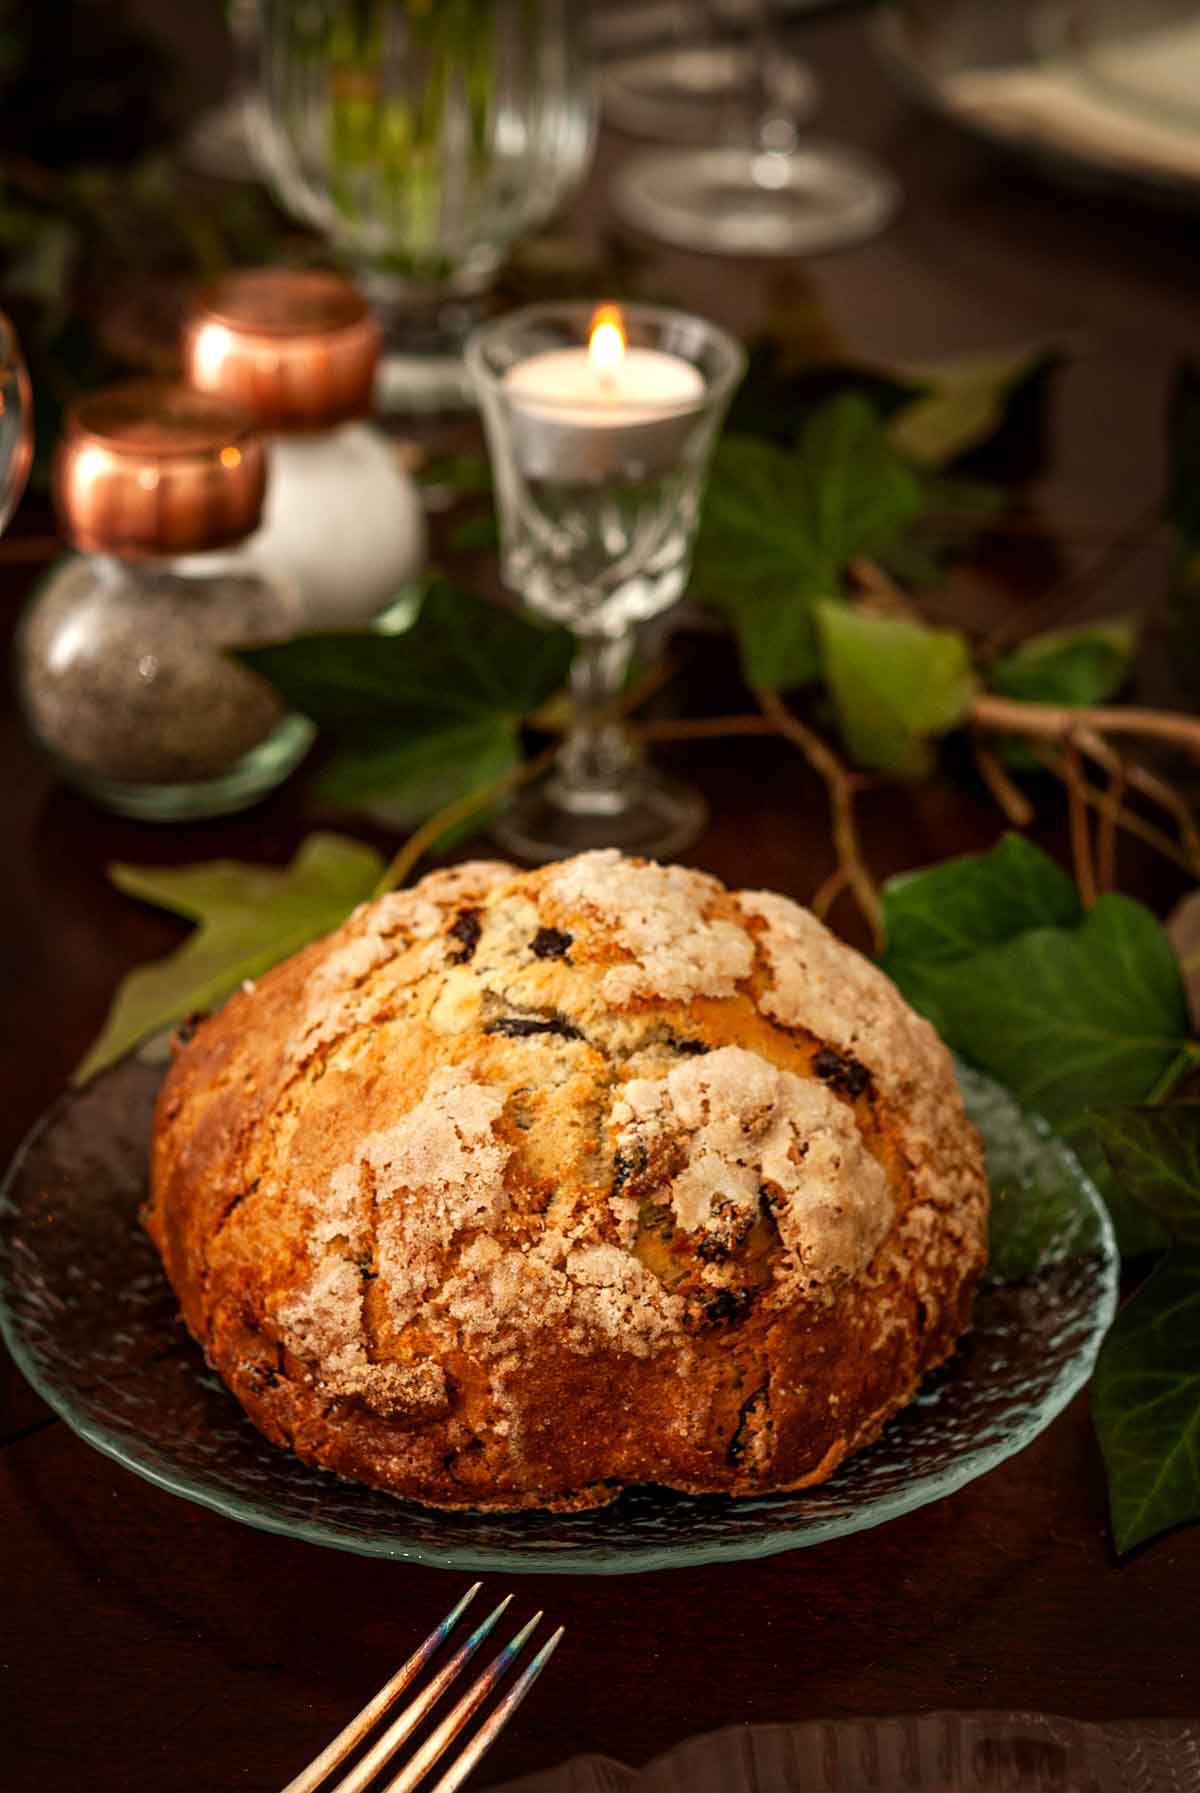 A plate with soda bread on a table with ivy, candles and salt and pepper shakers.